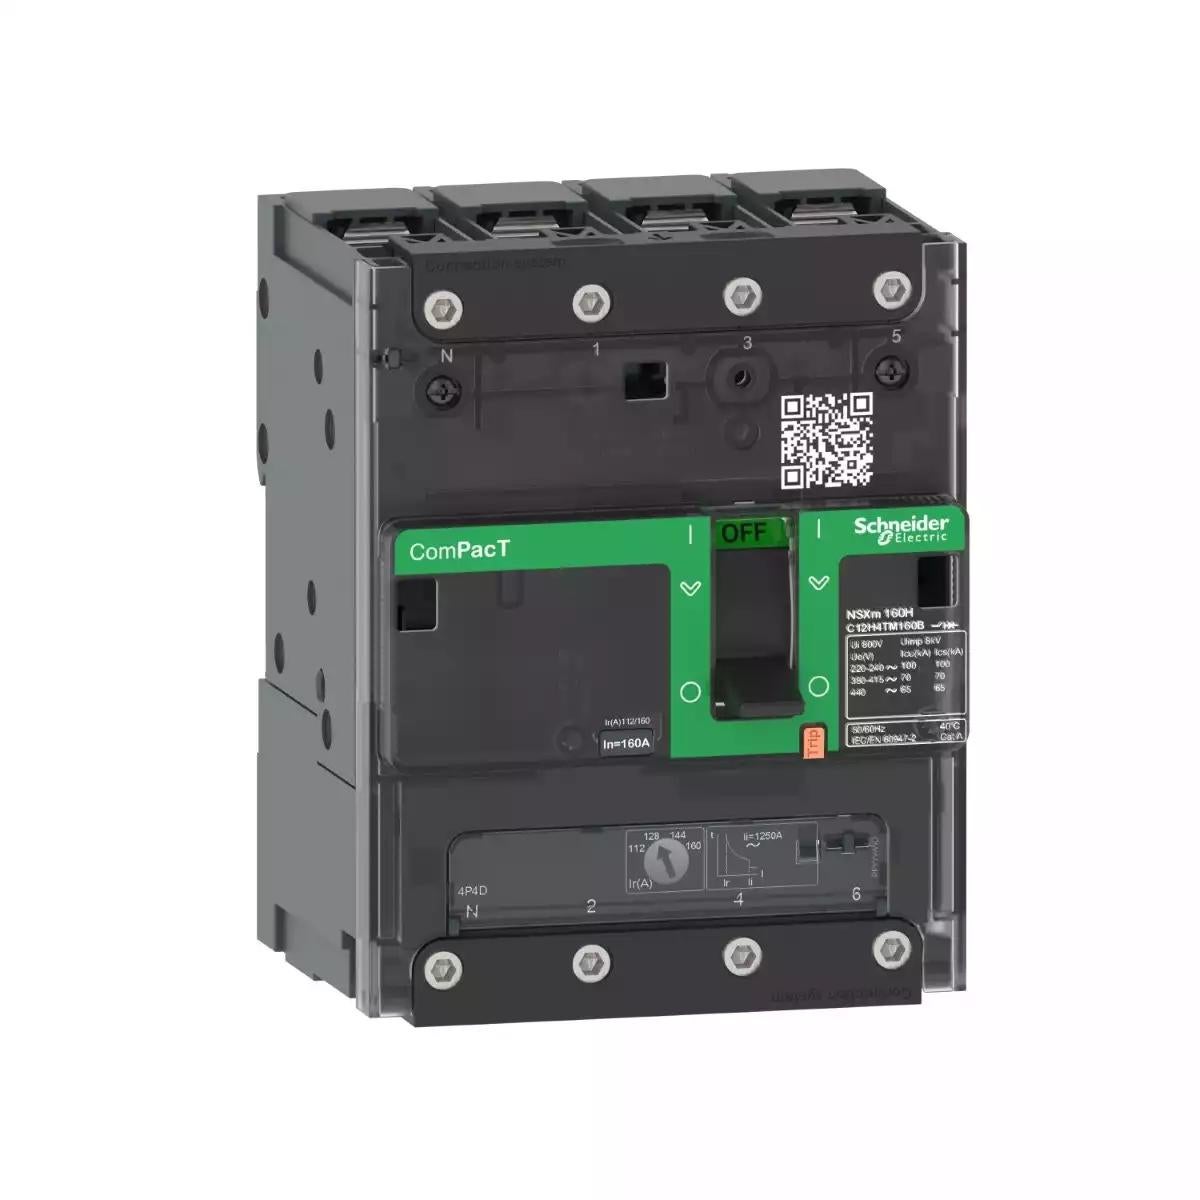 Schneider Electric Circuit breaker ComPacT NSXm N (50kA at 415VAC), 4 Poles 3d, 40A rating TMD trip unit, compression lugs and busbar connectors